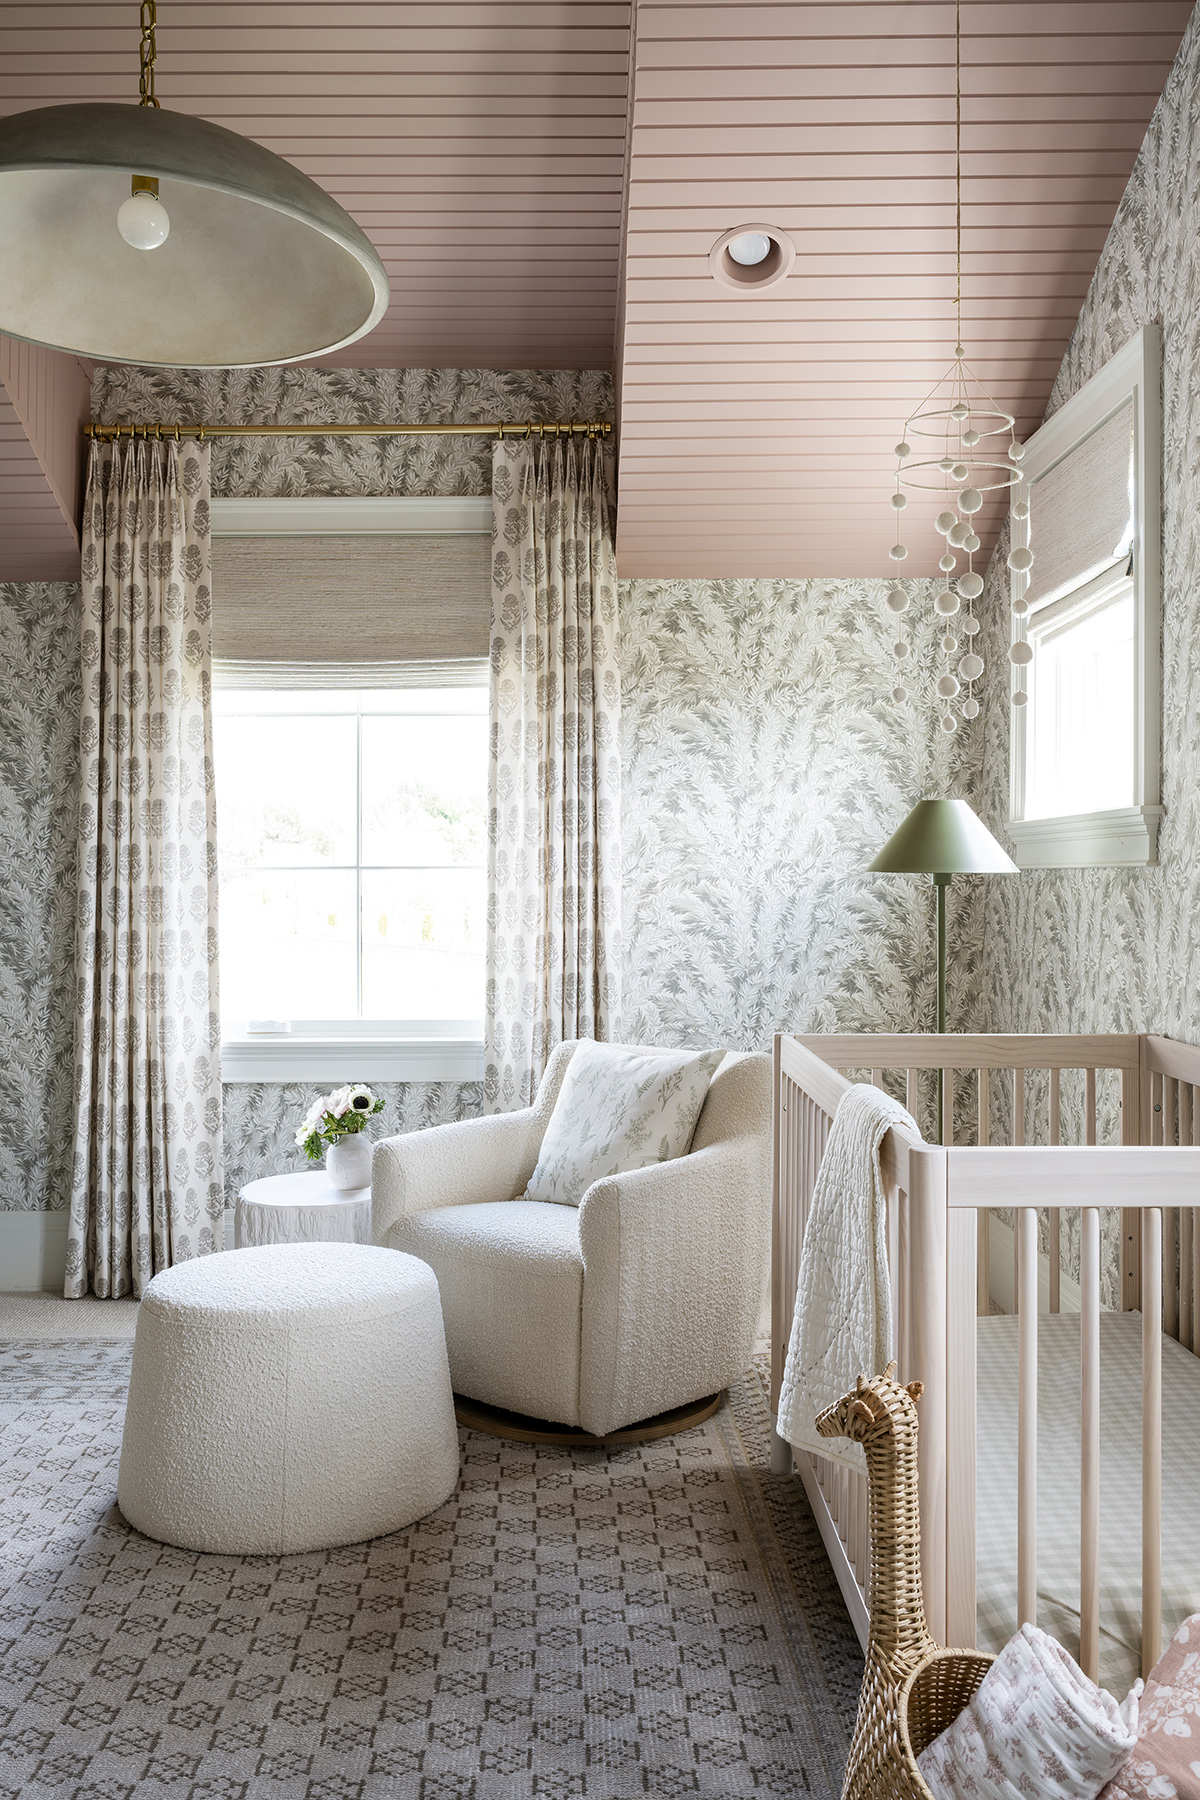 patterned wallpaper with patterned curtains